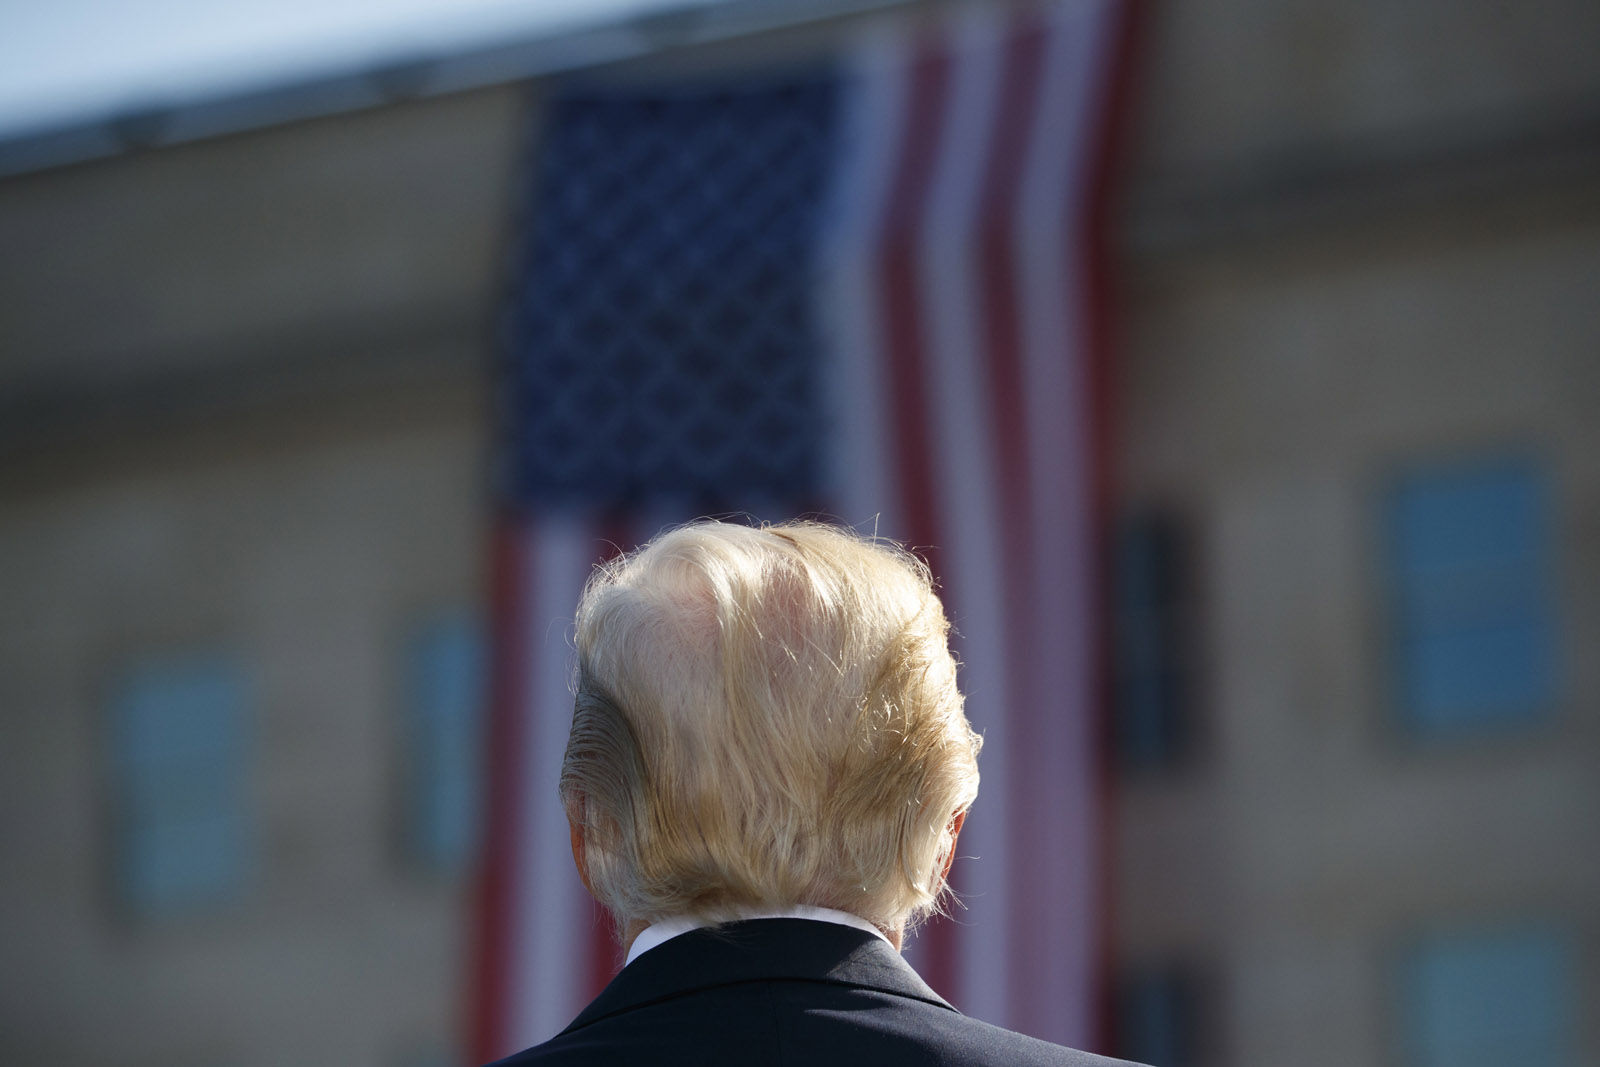 President Donald Trump stands for the national anthem during a ceremony to mark the anniversary of the Sept. 11 terrorist attacks, Monday, Sept. 11, 2017, at the Pentagon. (AP Photo/Evan Vucci)